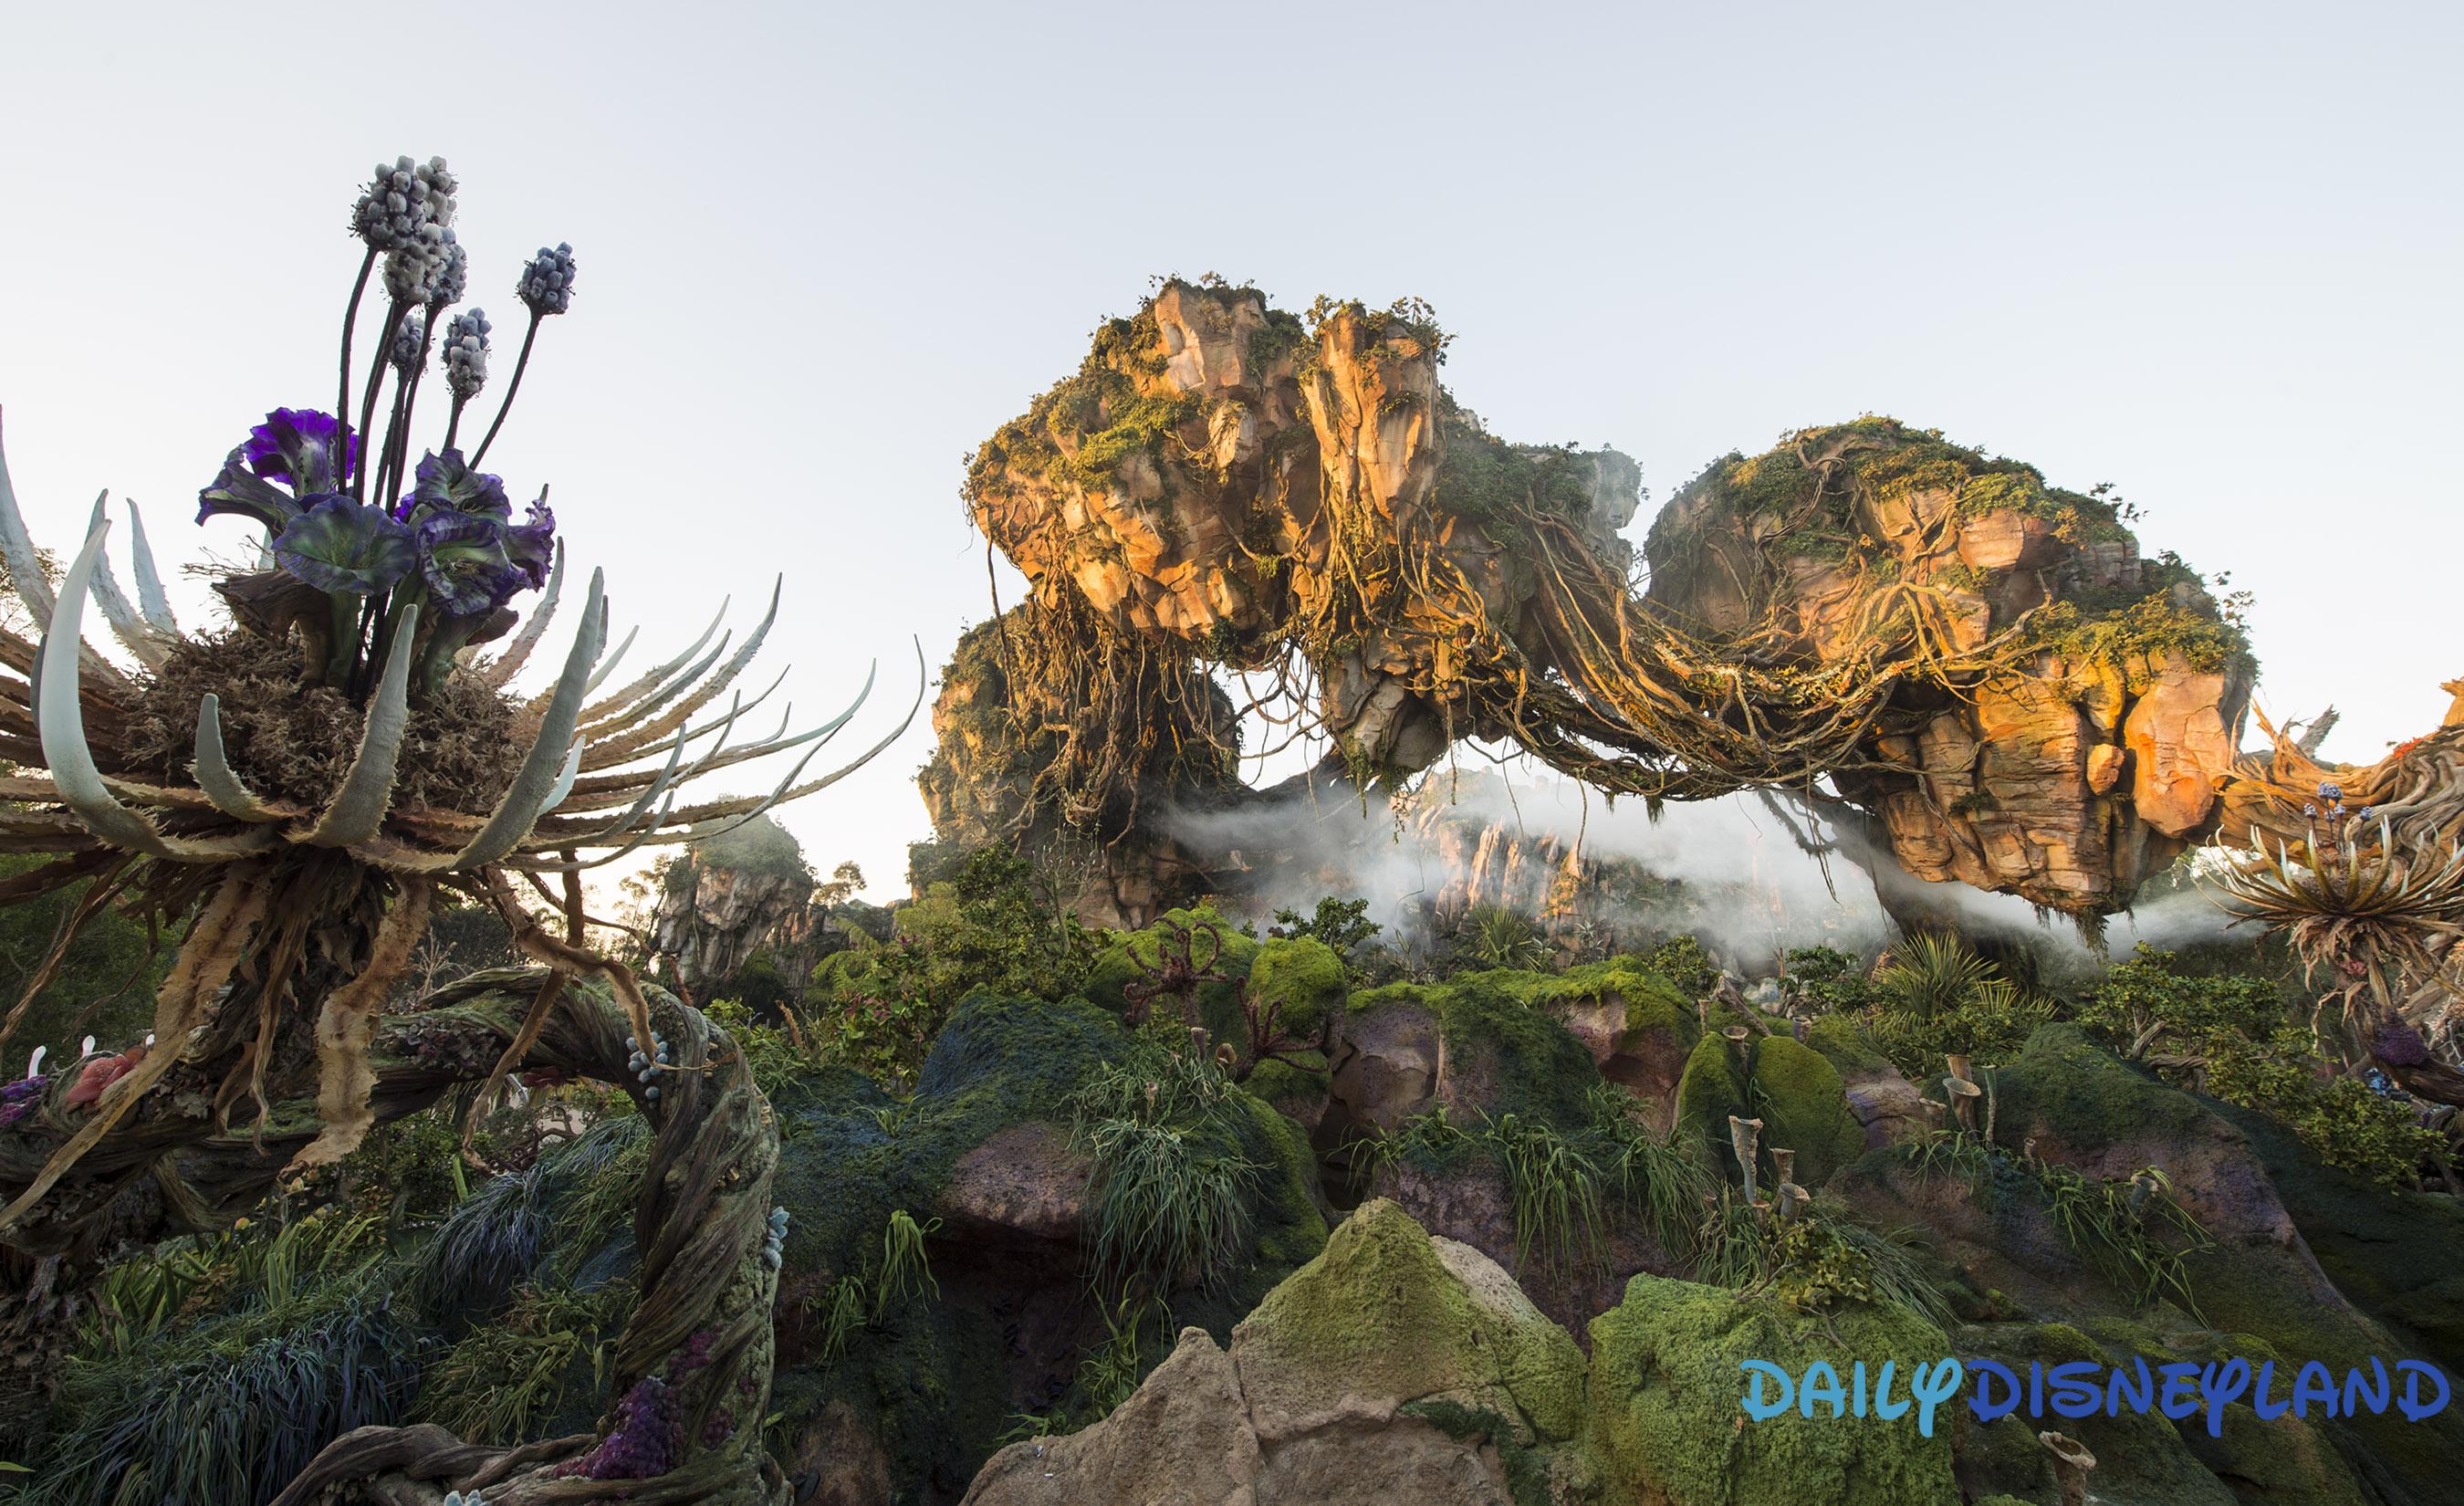 Floating mountains grace the skyline while exotic plants fill the colorful landscape inside Pandora - The World of Avatar, which opens May 27, 2017 at Disney's Animal Kingdom. Pandora - The World of Avatar will bring a variety of new experiences to the park, including a family-friendly attraction called Na'vi River Journey and new food & beverage and merchandise locations. Disney's Animal Kingdom is one of four theme parks at Walt Disney World Resort in Lake Buena Vista, Fla. (Kent Phillips, photographer)